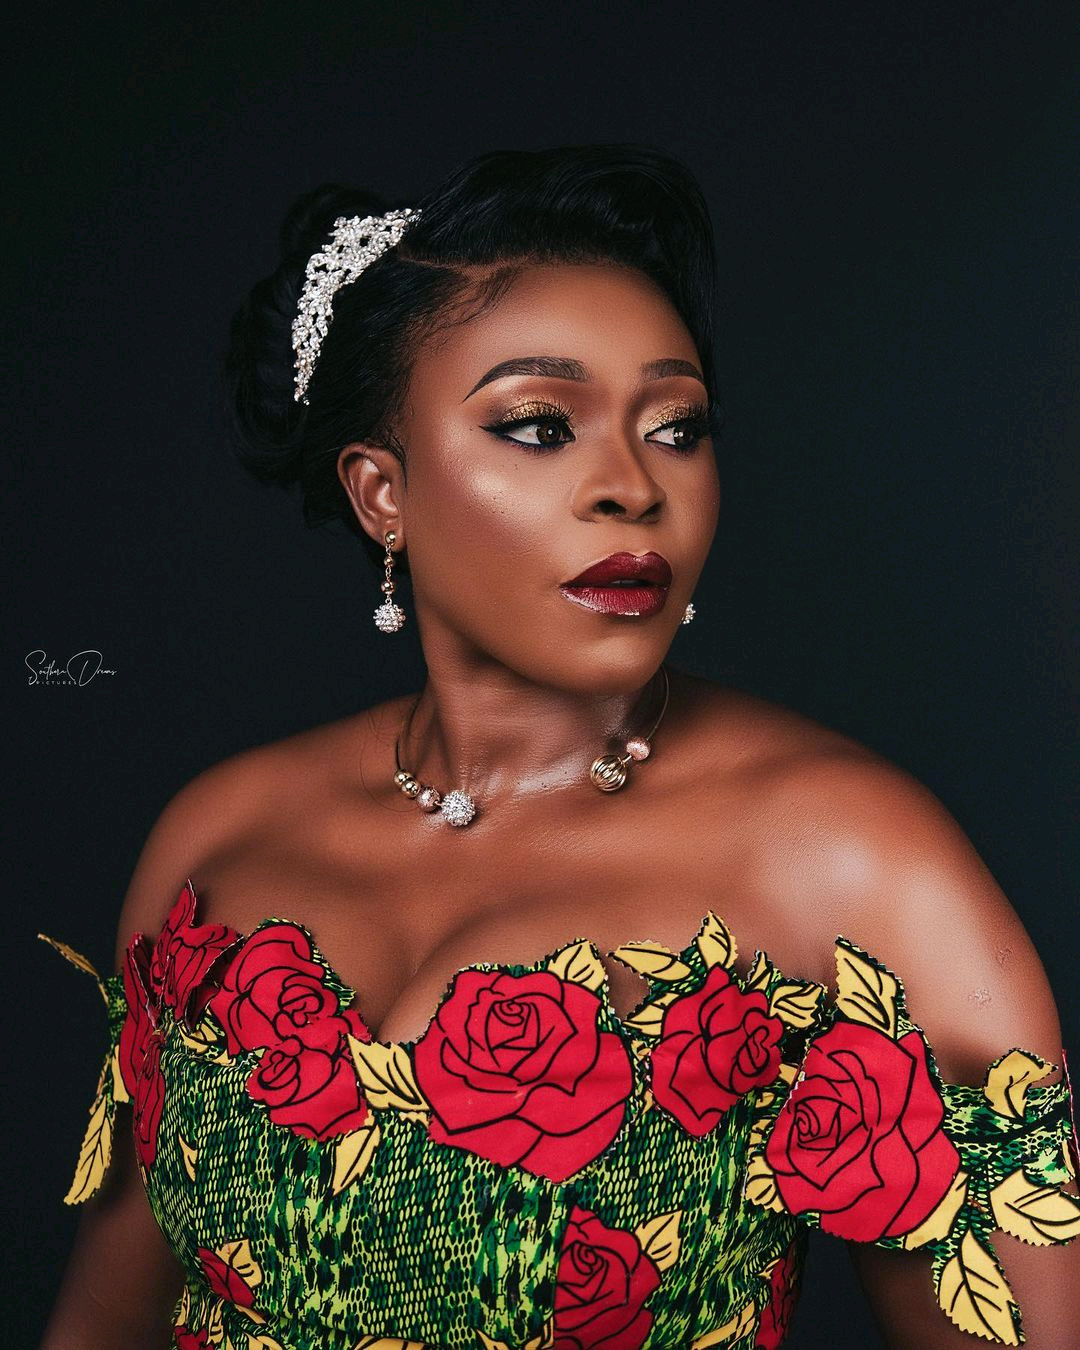 “It’s Unacceptable For You To Kick Crystal Okoye Out Of A Job Over A birthday Post,” Actress Ifemelu Dike Tells Chizzy Alichi